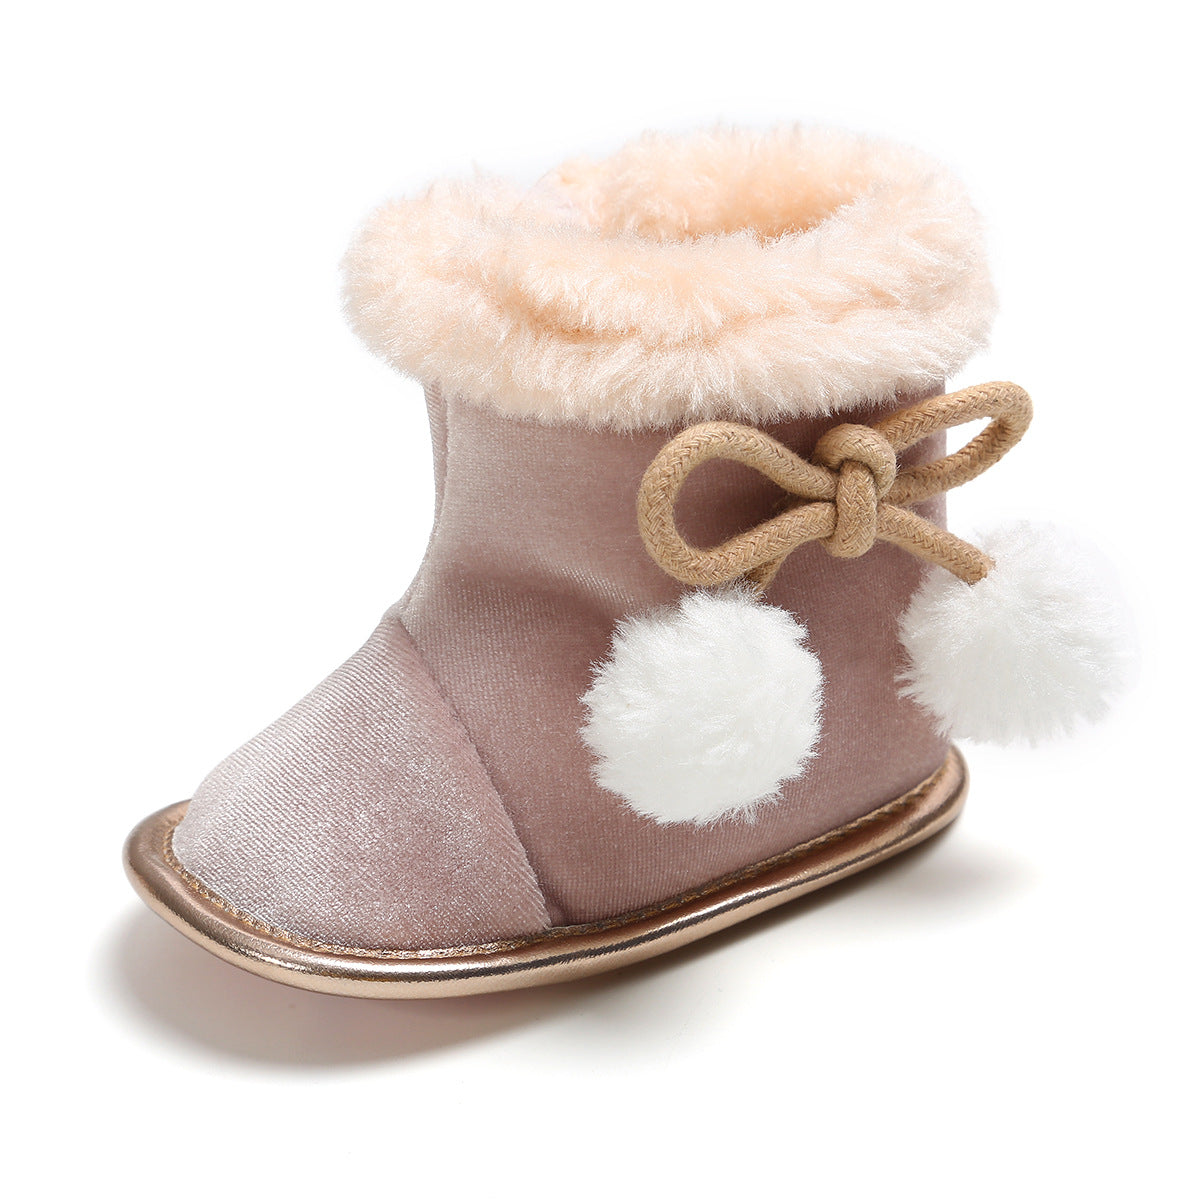 Dropship New Winter Baby Girls Boots Casual Warm Rabbit Fur Mid-Calf Boots  Shoes Child Slip-On Round Toe Platform Snow Boots Shoes E11142 to Sell  Online at a Lower Price